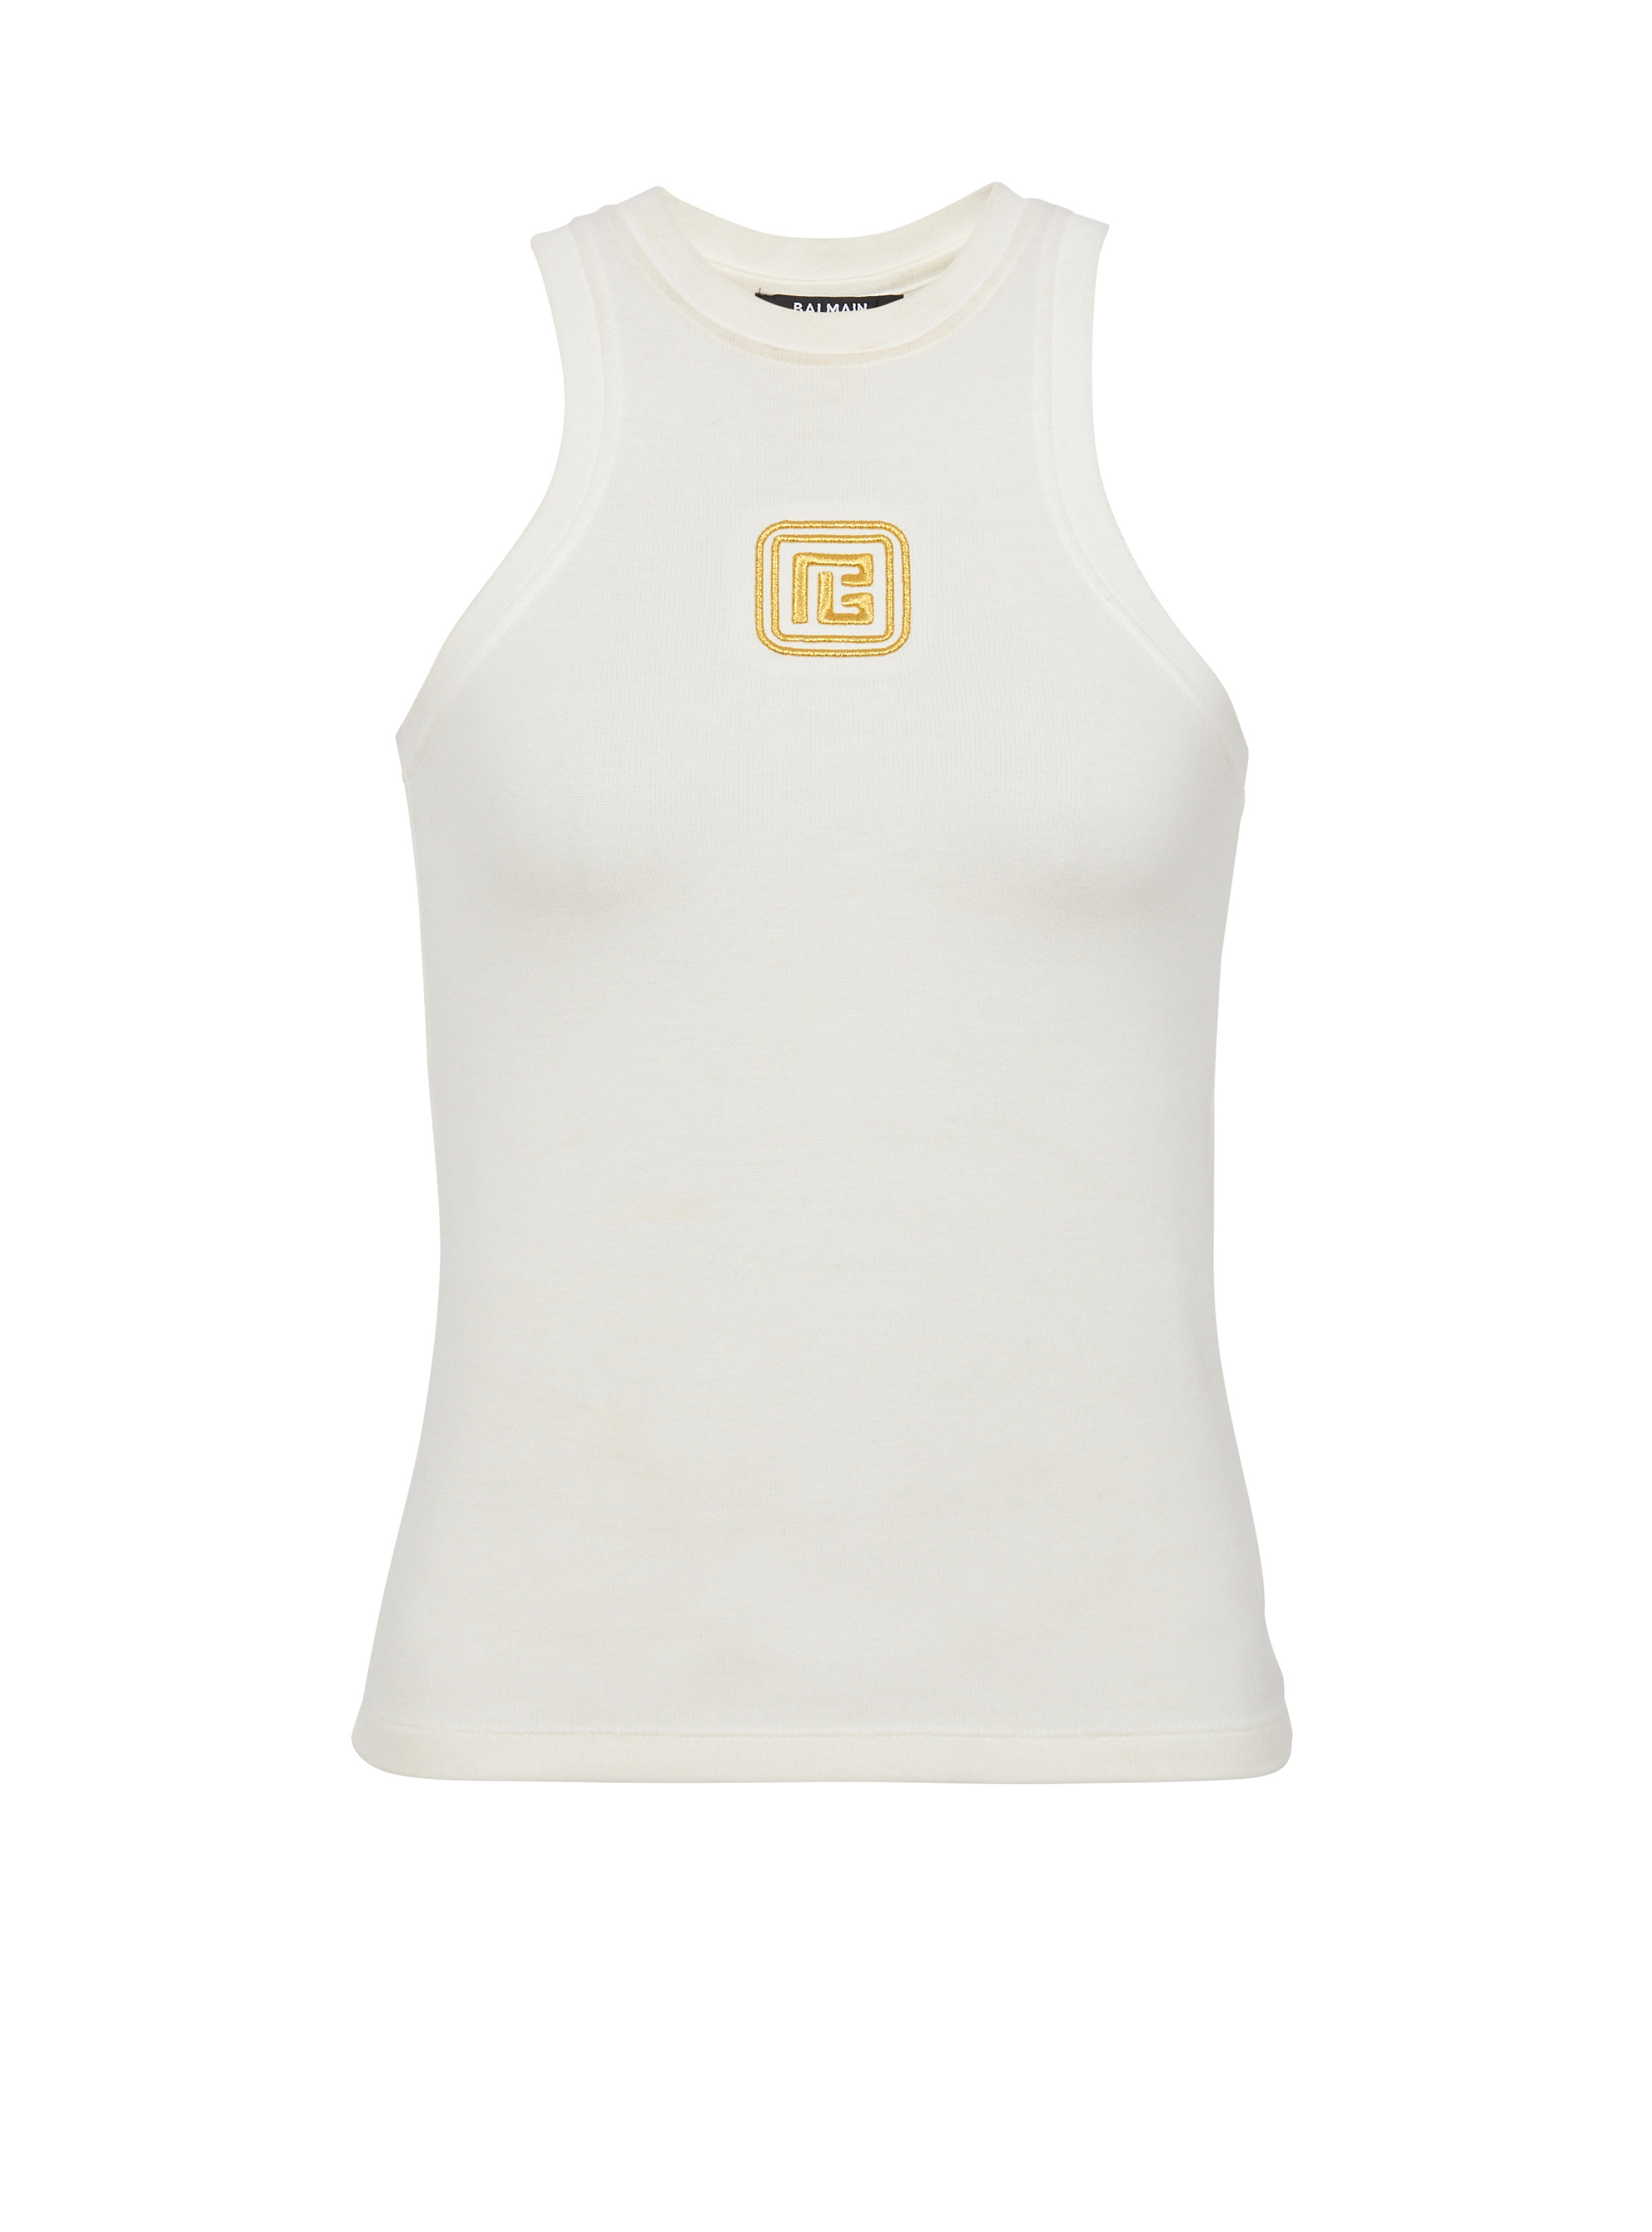 PB embroidered tank top - 1